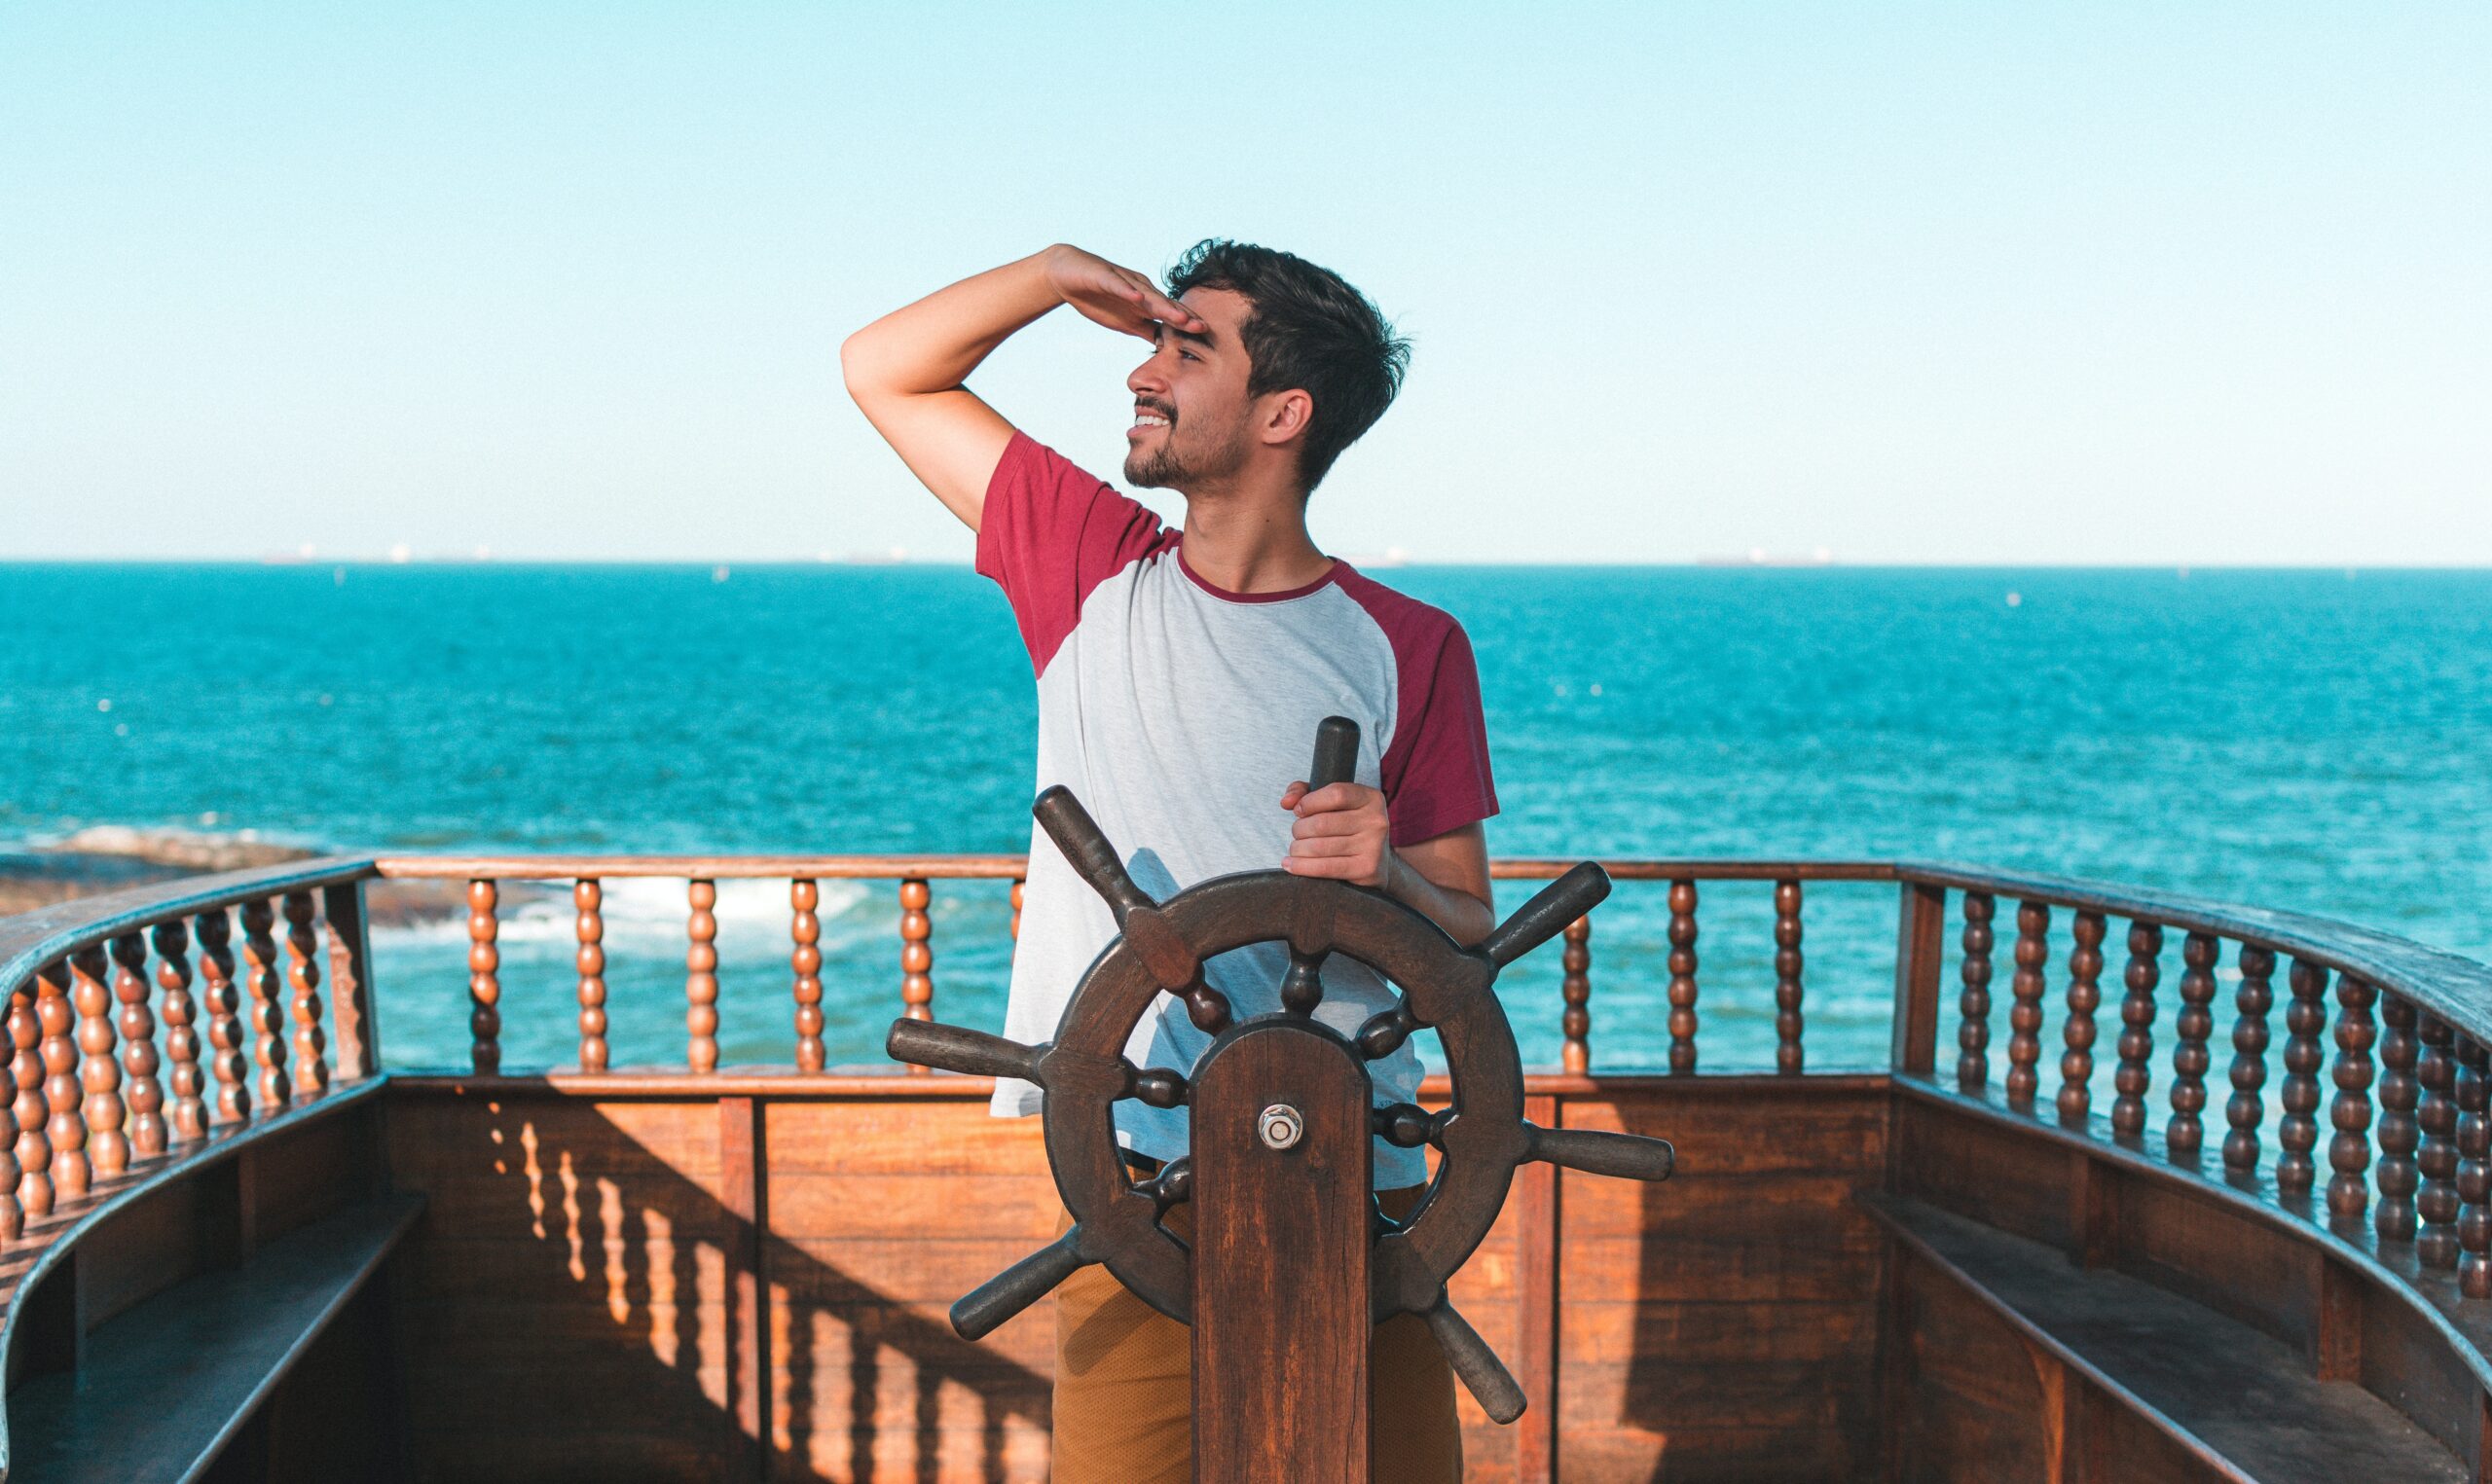 How becoming the captain of your life makes all the difference